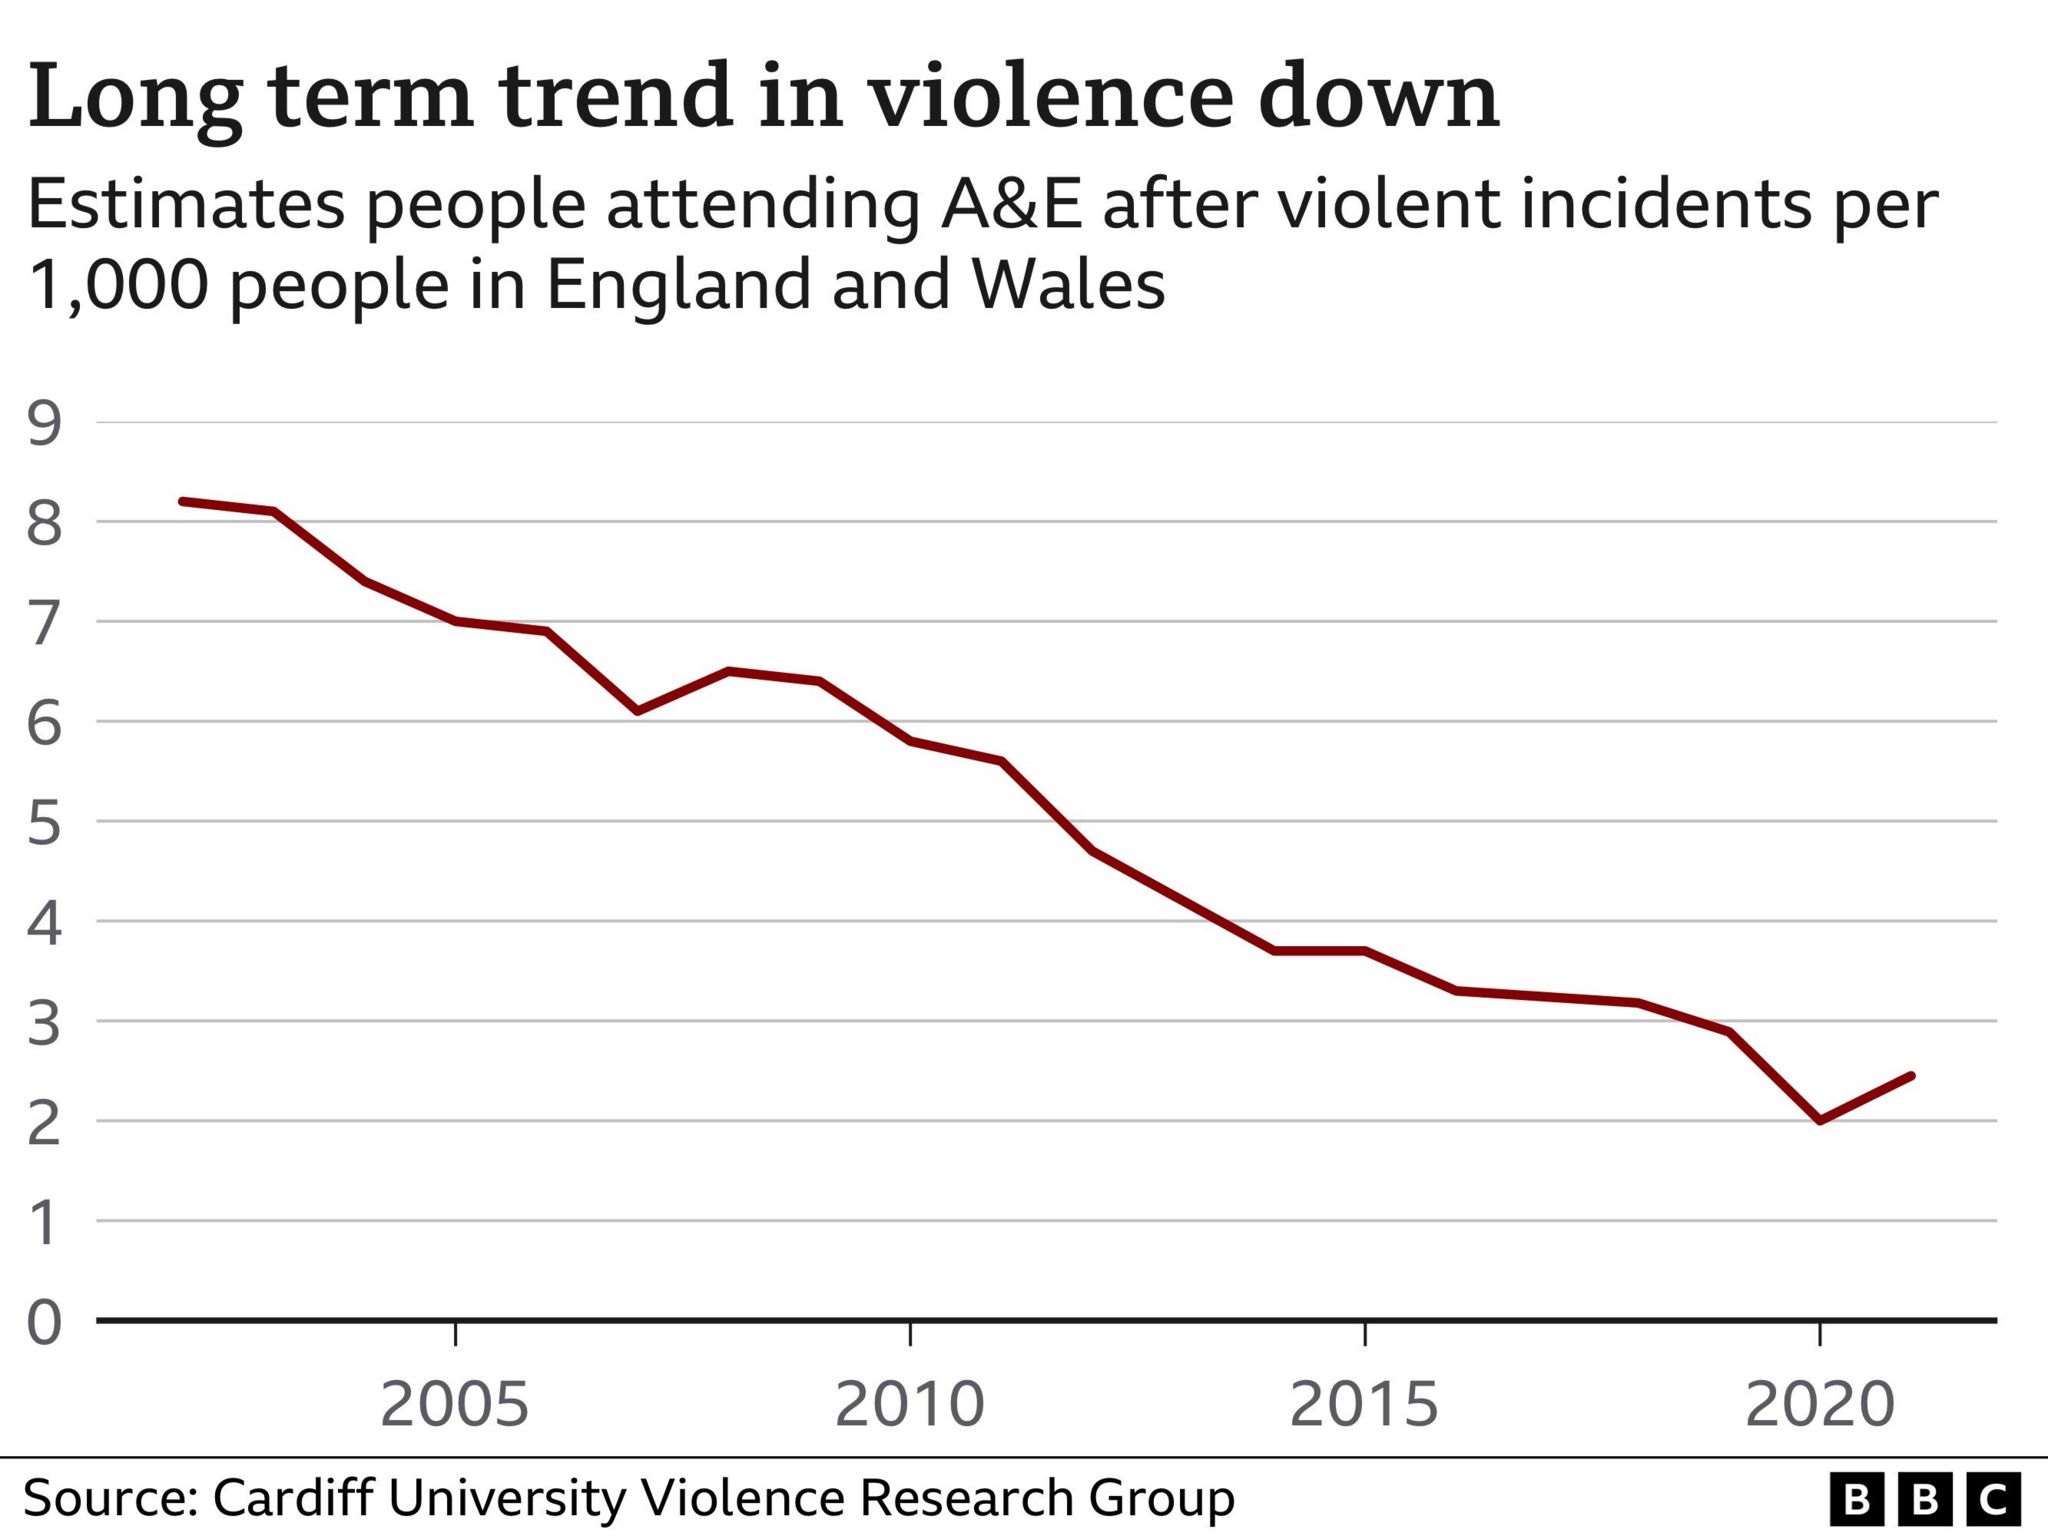 Graph showing the long-term trend in violent crime